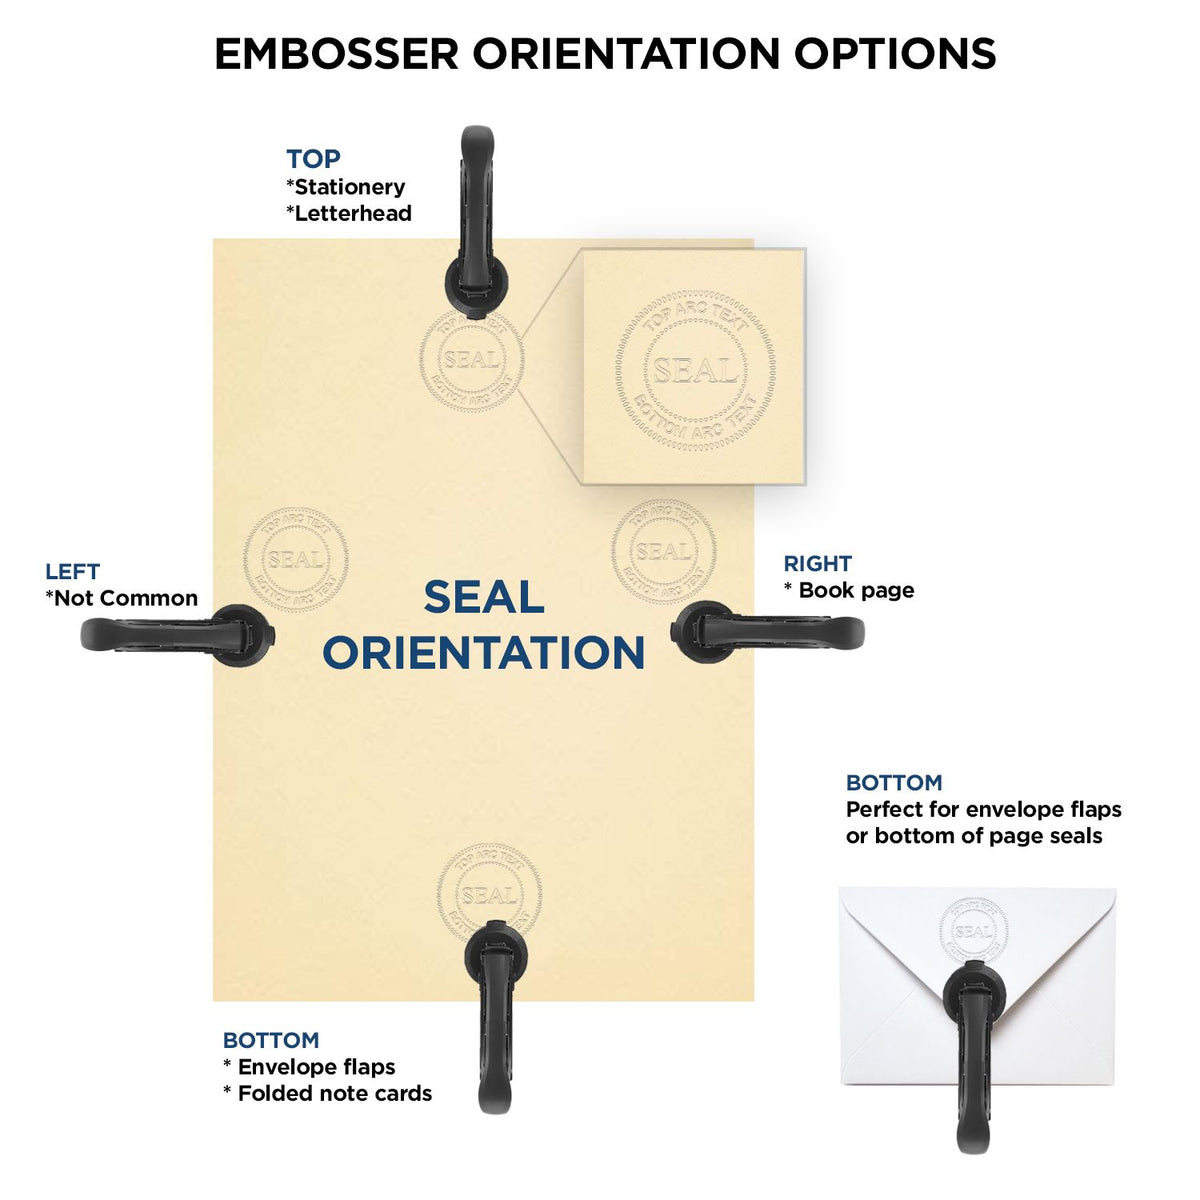 An infographic for the Heavy Duty Cast Iron South Dakota Geologist Seal Embosser showing embosser orientation, this is showing examples of a top, bottom, right and left insert.